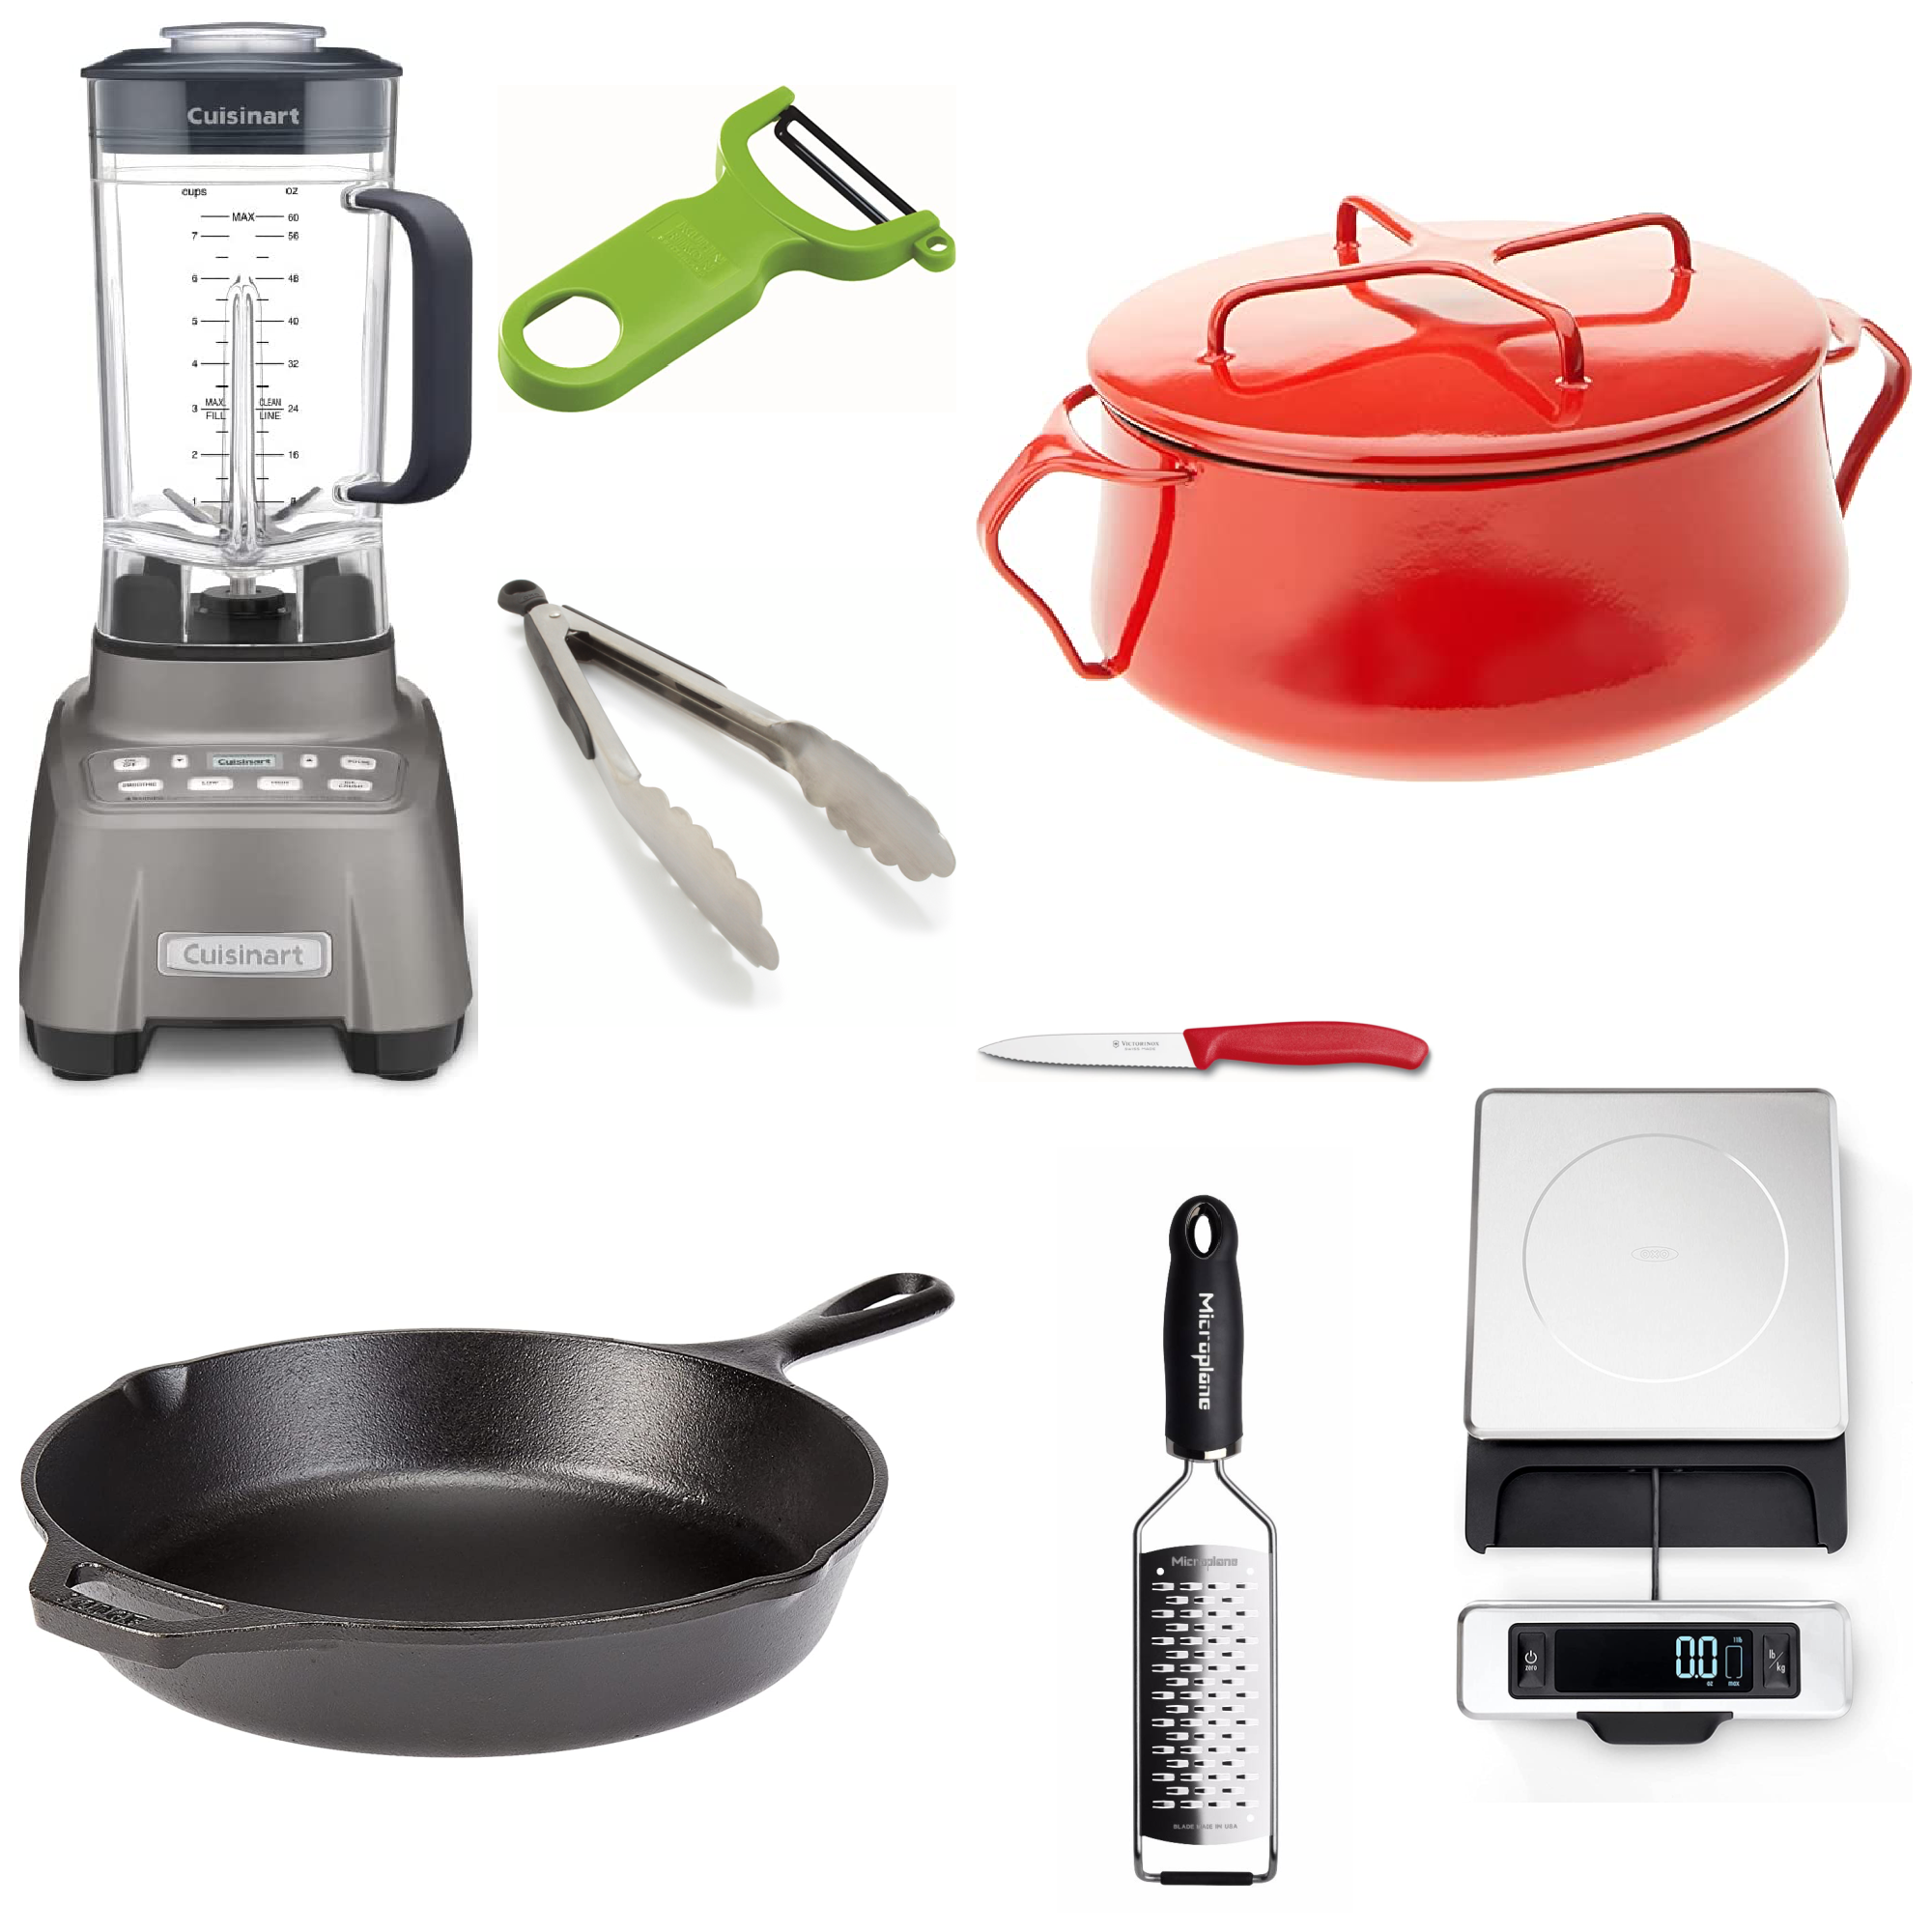 Hungry Girl's Favorite Kitchen Gadgets